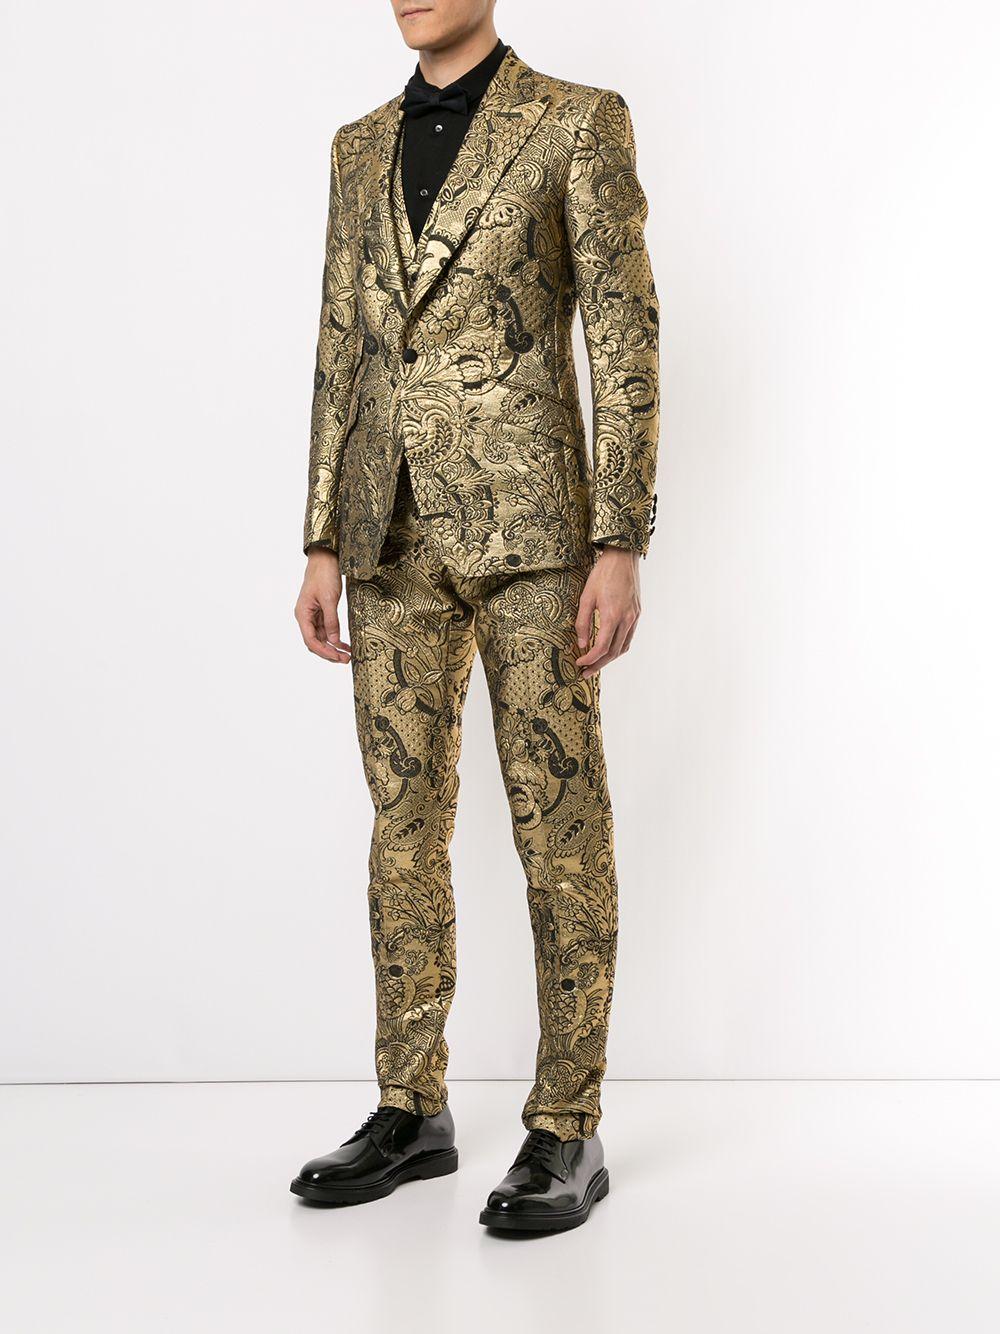 Dolce & Gabbana Floral Brocade Two-piece Suit in Metallic for Men | Lyst